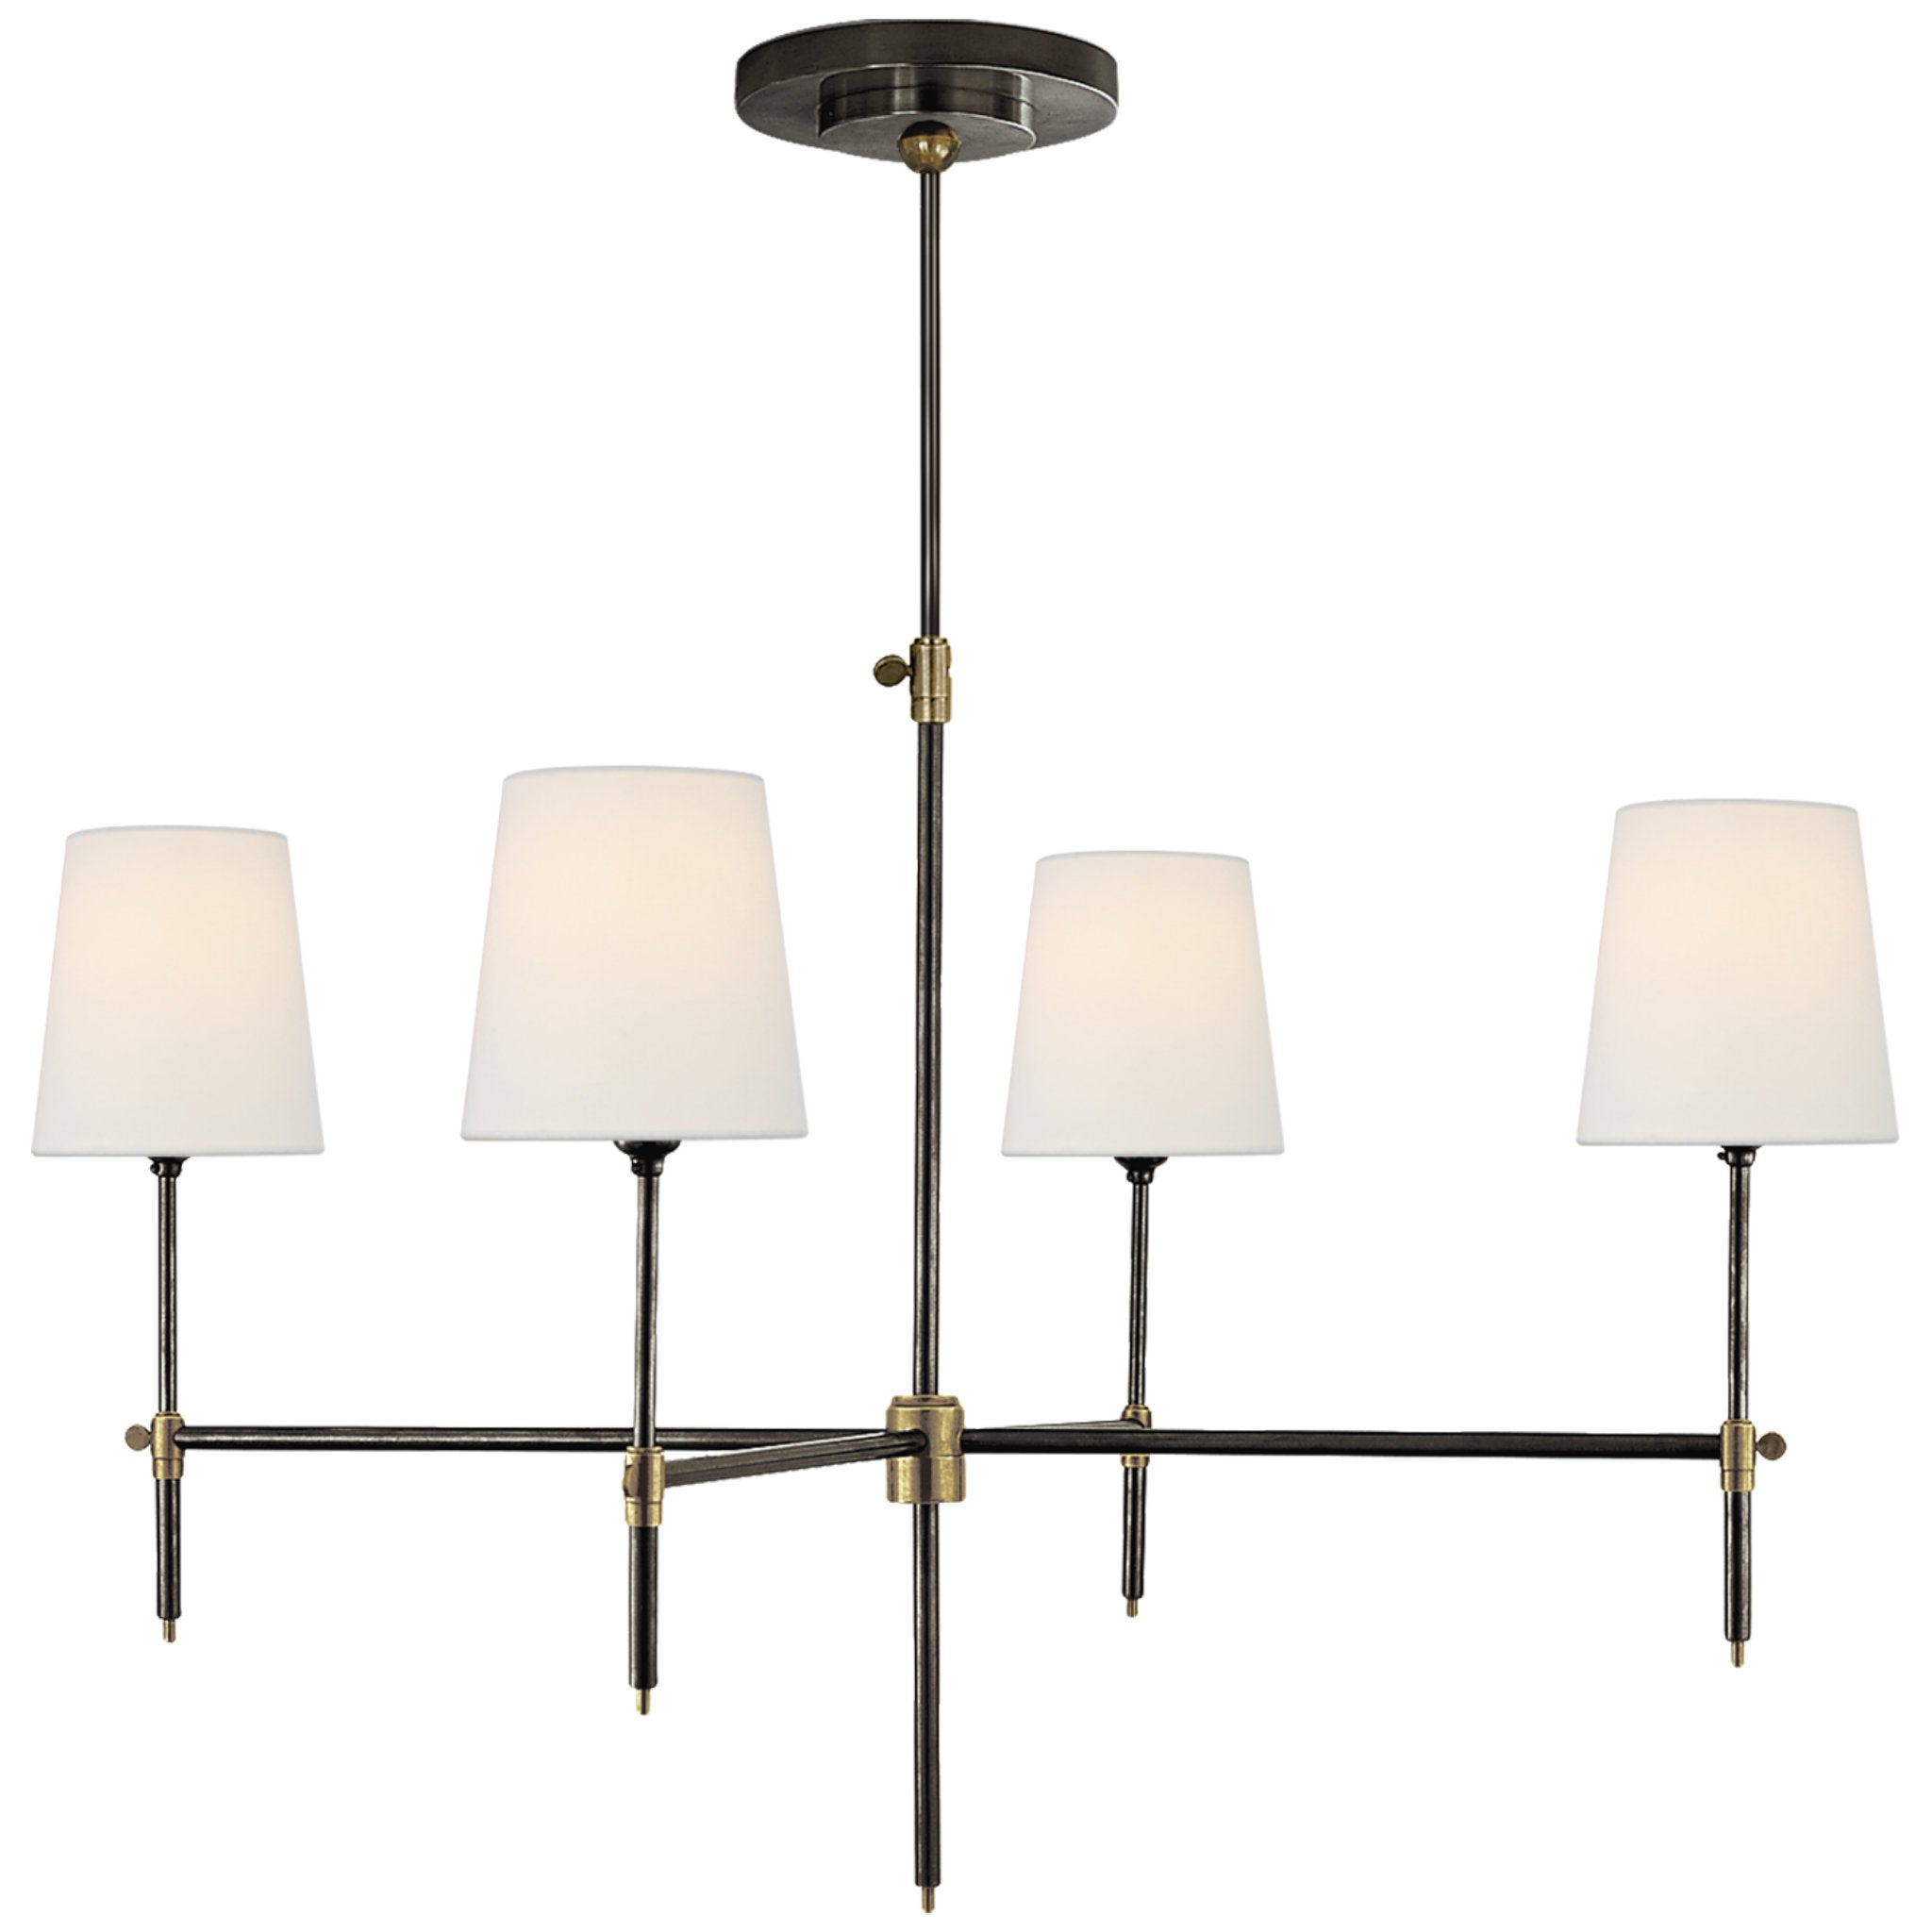 Thomas O'Brien Bryant Large Chandelier in Bronze and Hand-Rubbed Antique Brass with Linen Shades